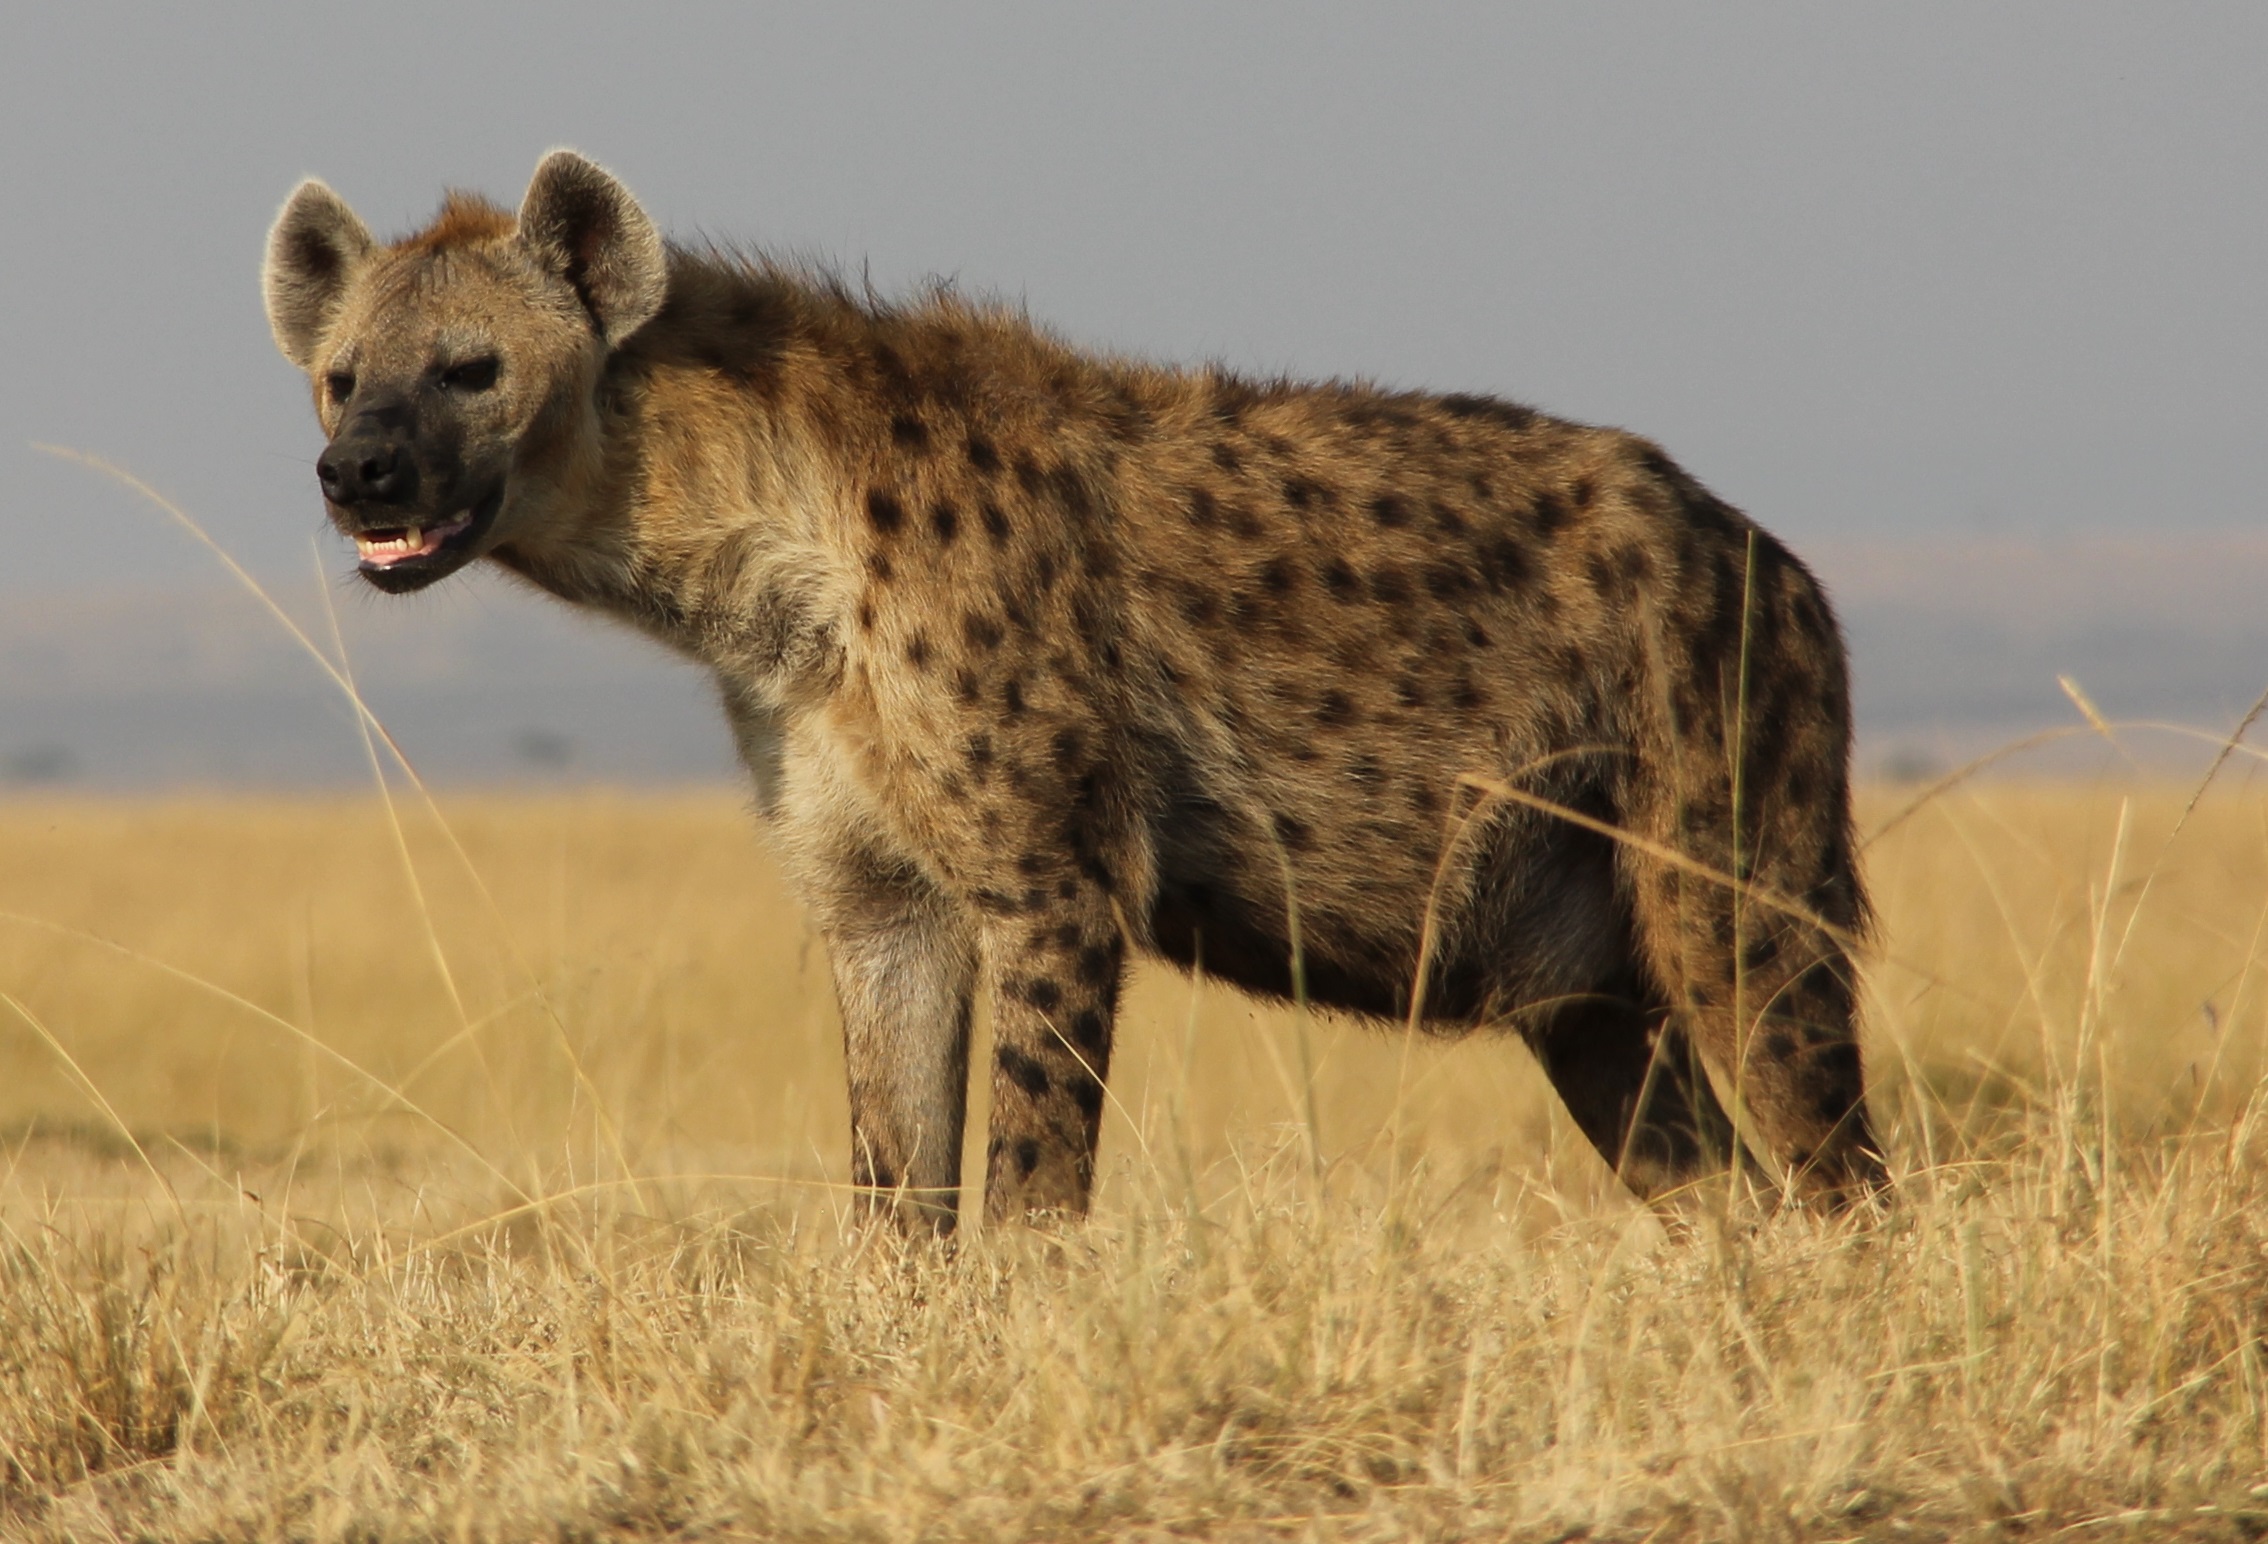 Female spotted hyenas have bigger penises than the males. u/stuloch